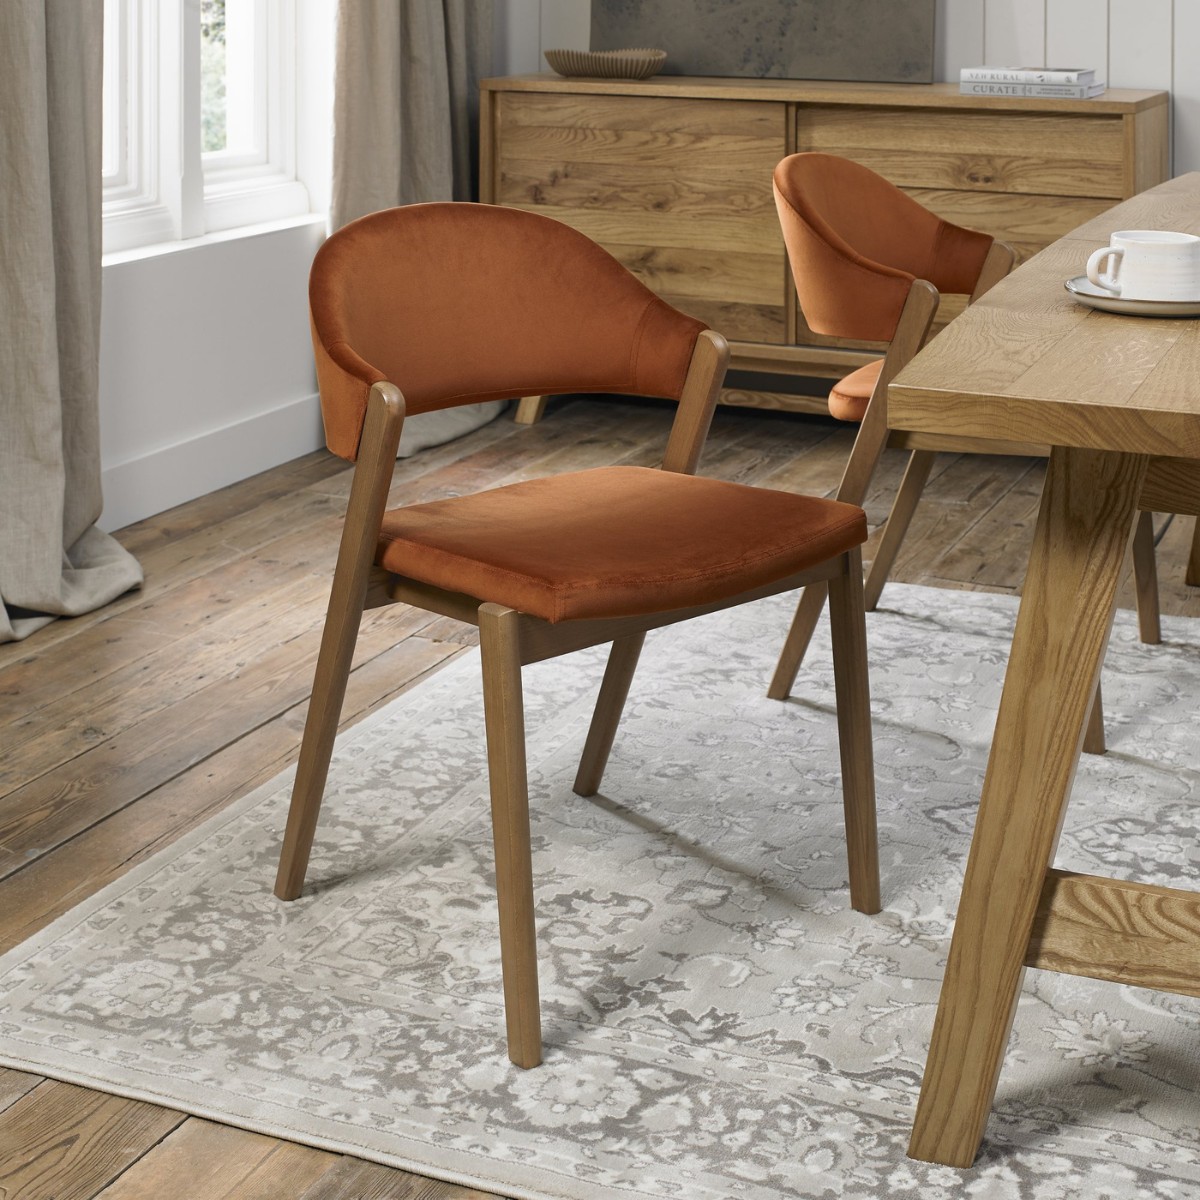 Chambery Rustic Oak Upholstered Dining Chair Orange - 4